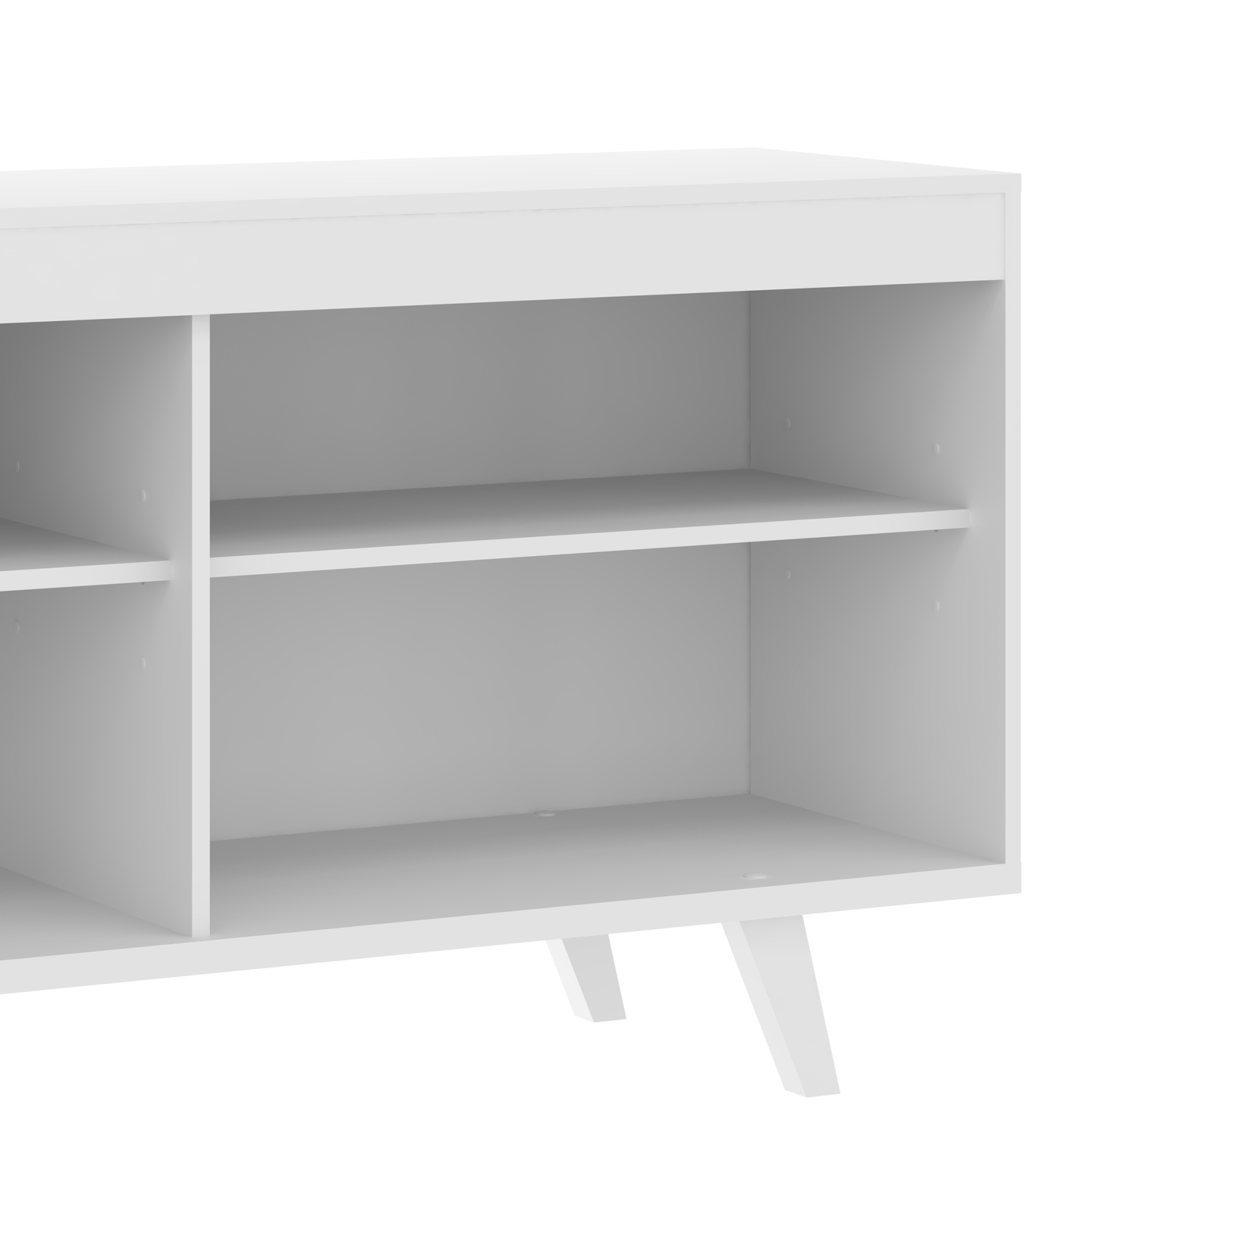 58 Inch Handcrafted Wood TV Media Entertainment Center Console, 4 Open Compartments, Angled Legs, White, Saltoro Sherpi